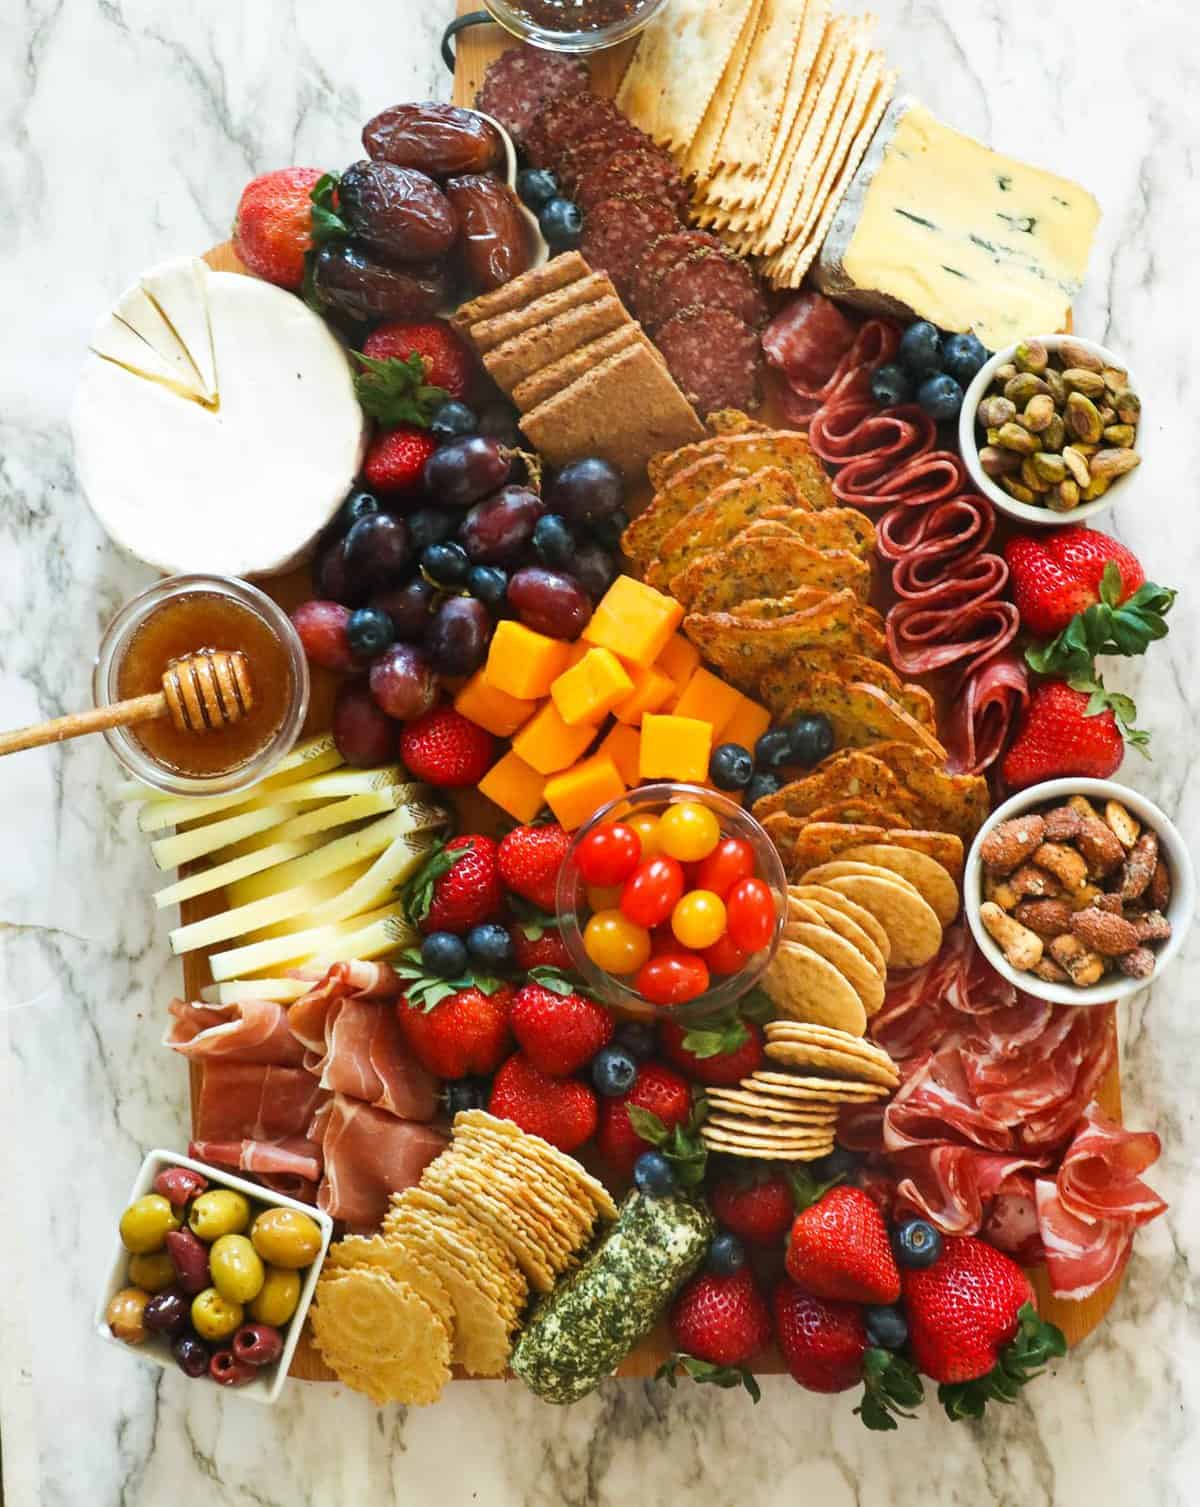 A finished charcuterie board